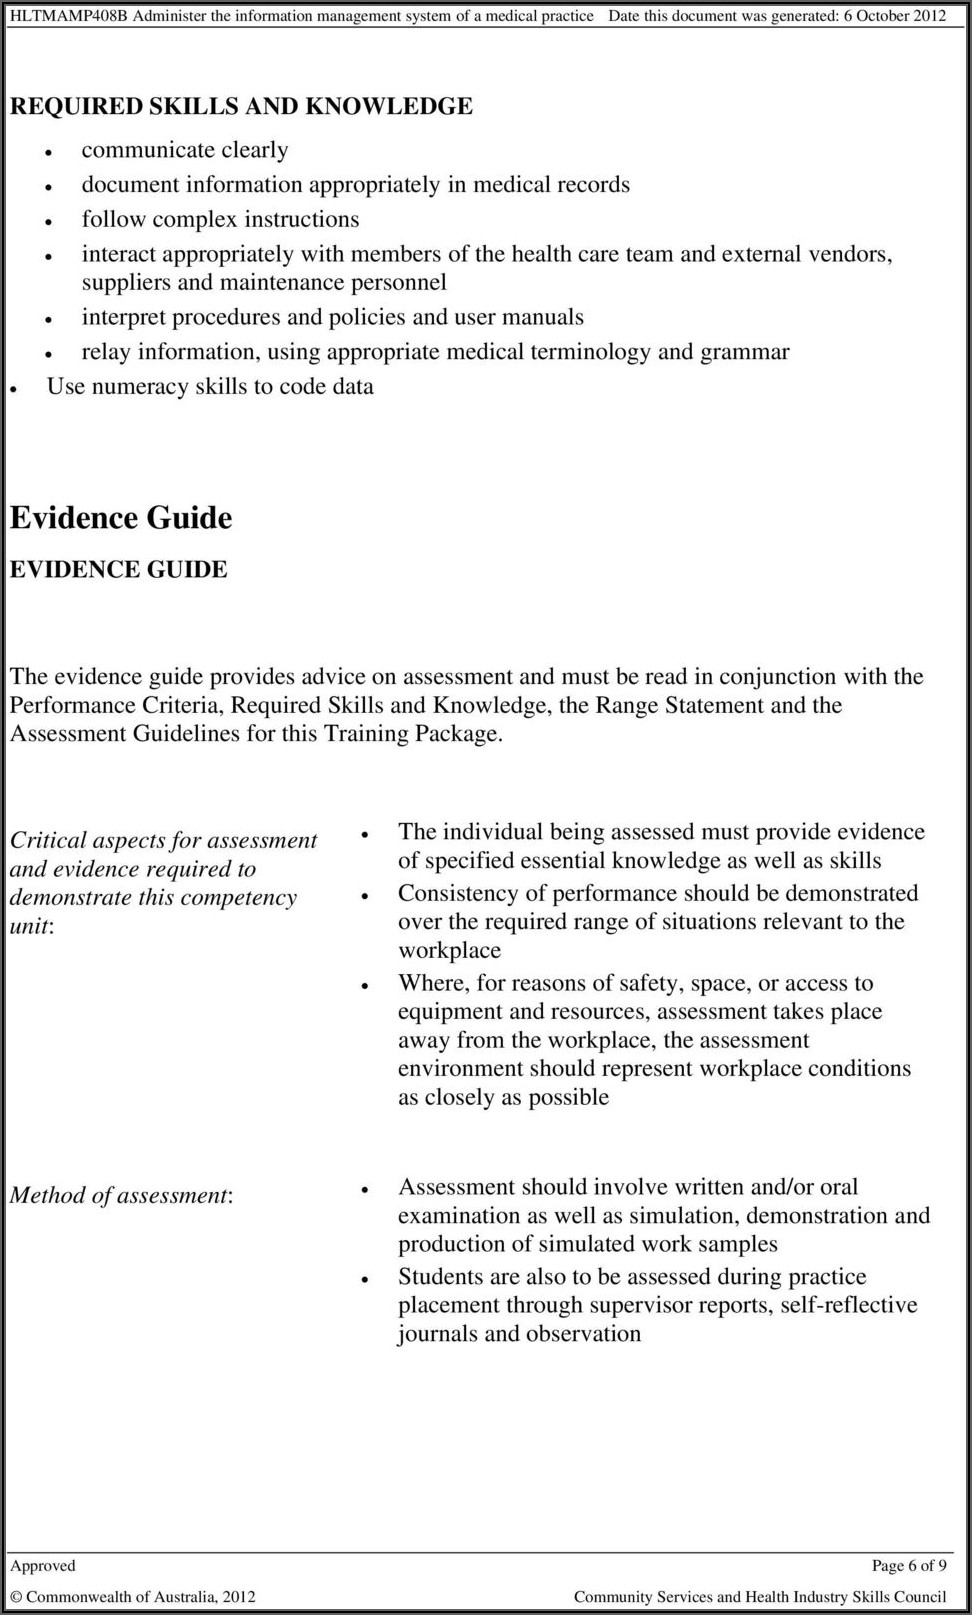 Gpcg Computer Security Policy And Procedure Manual Template